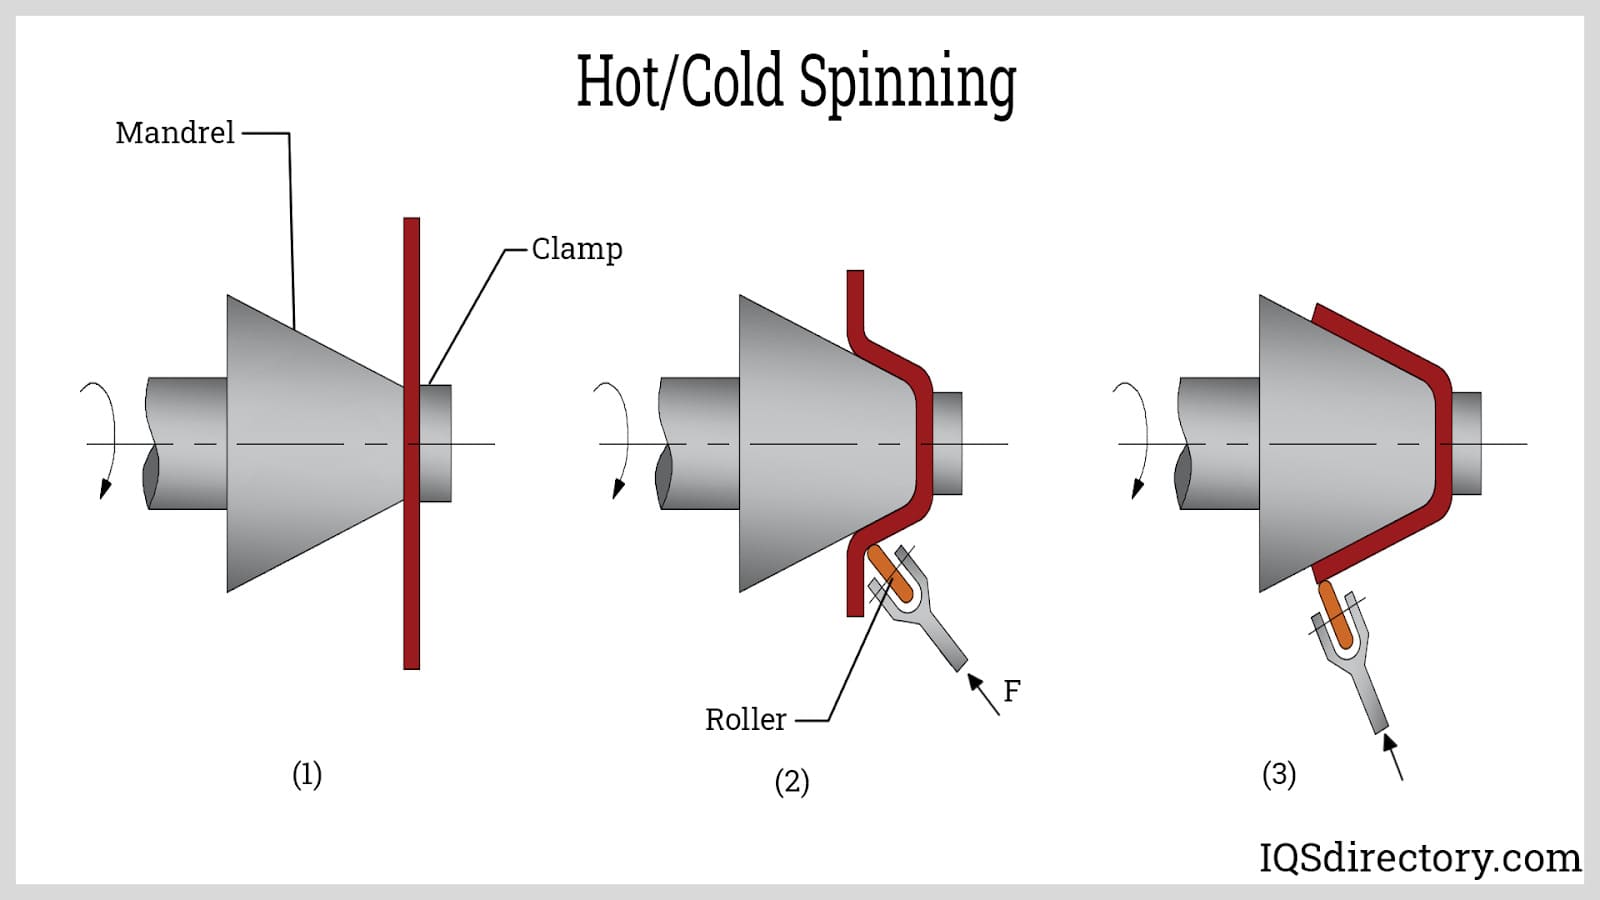 Hot/Cold Spinning